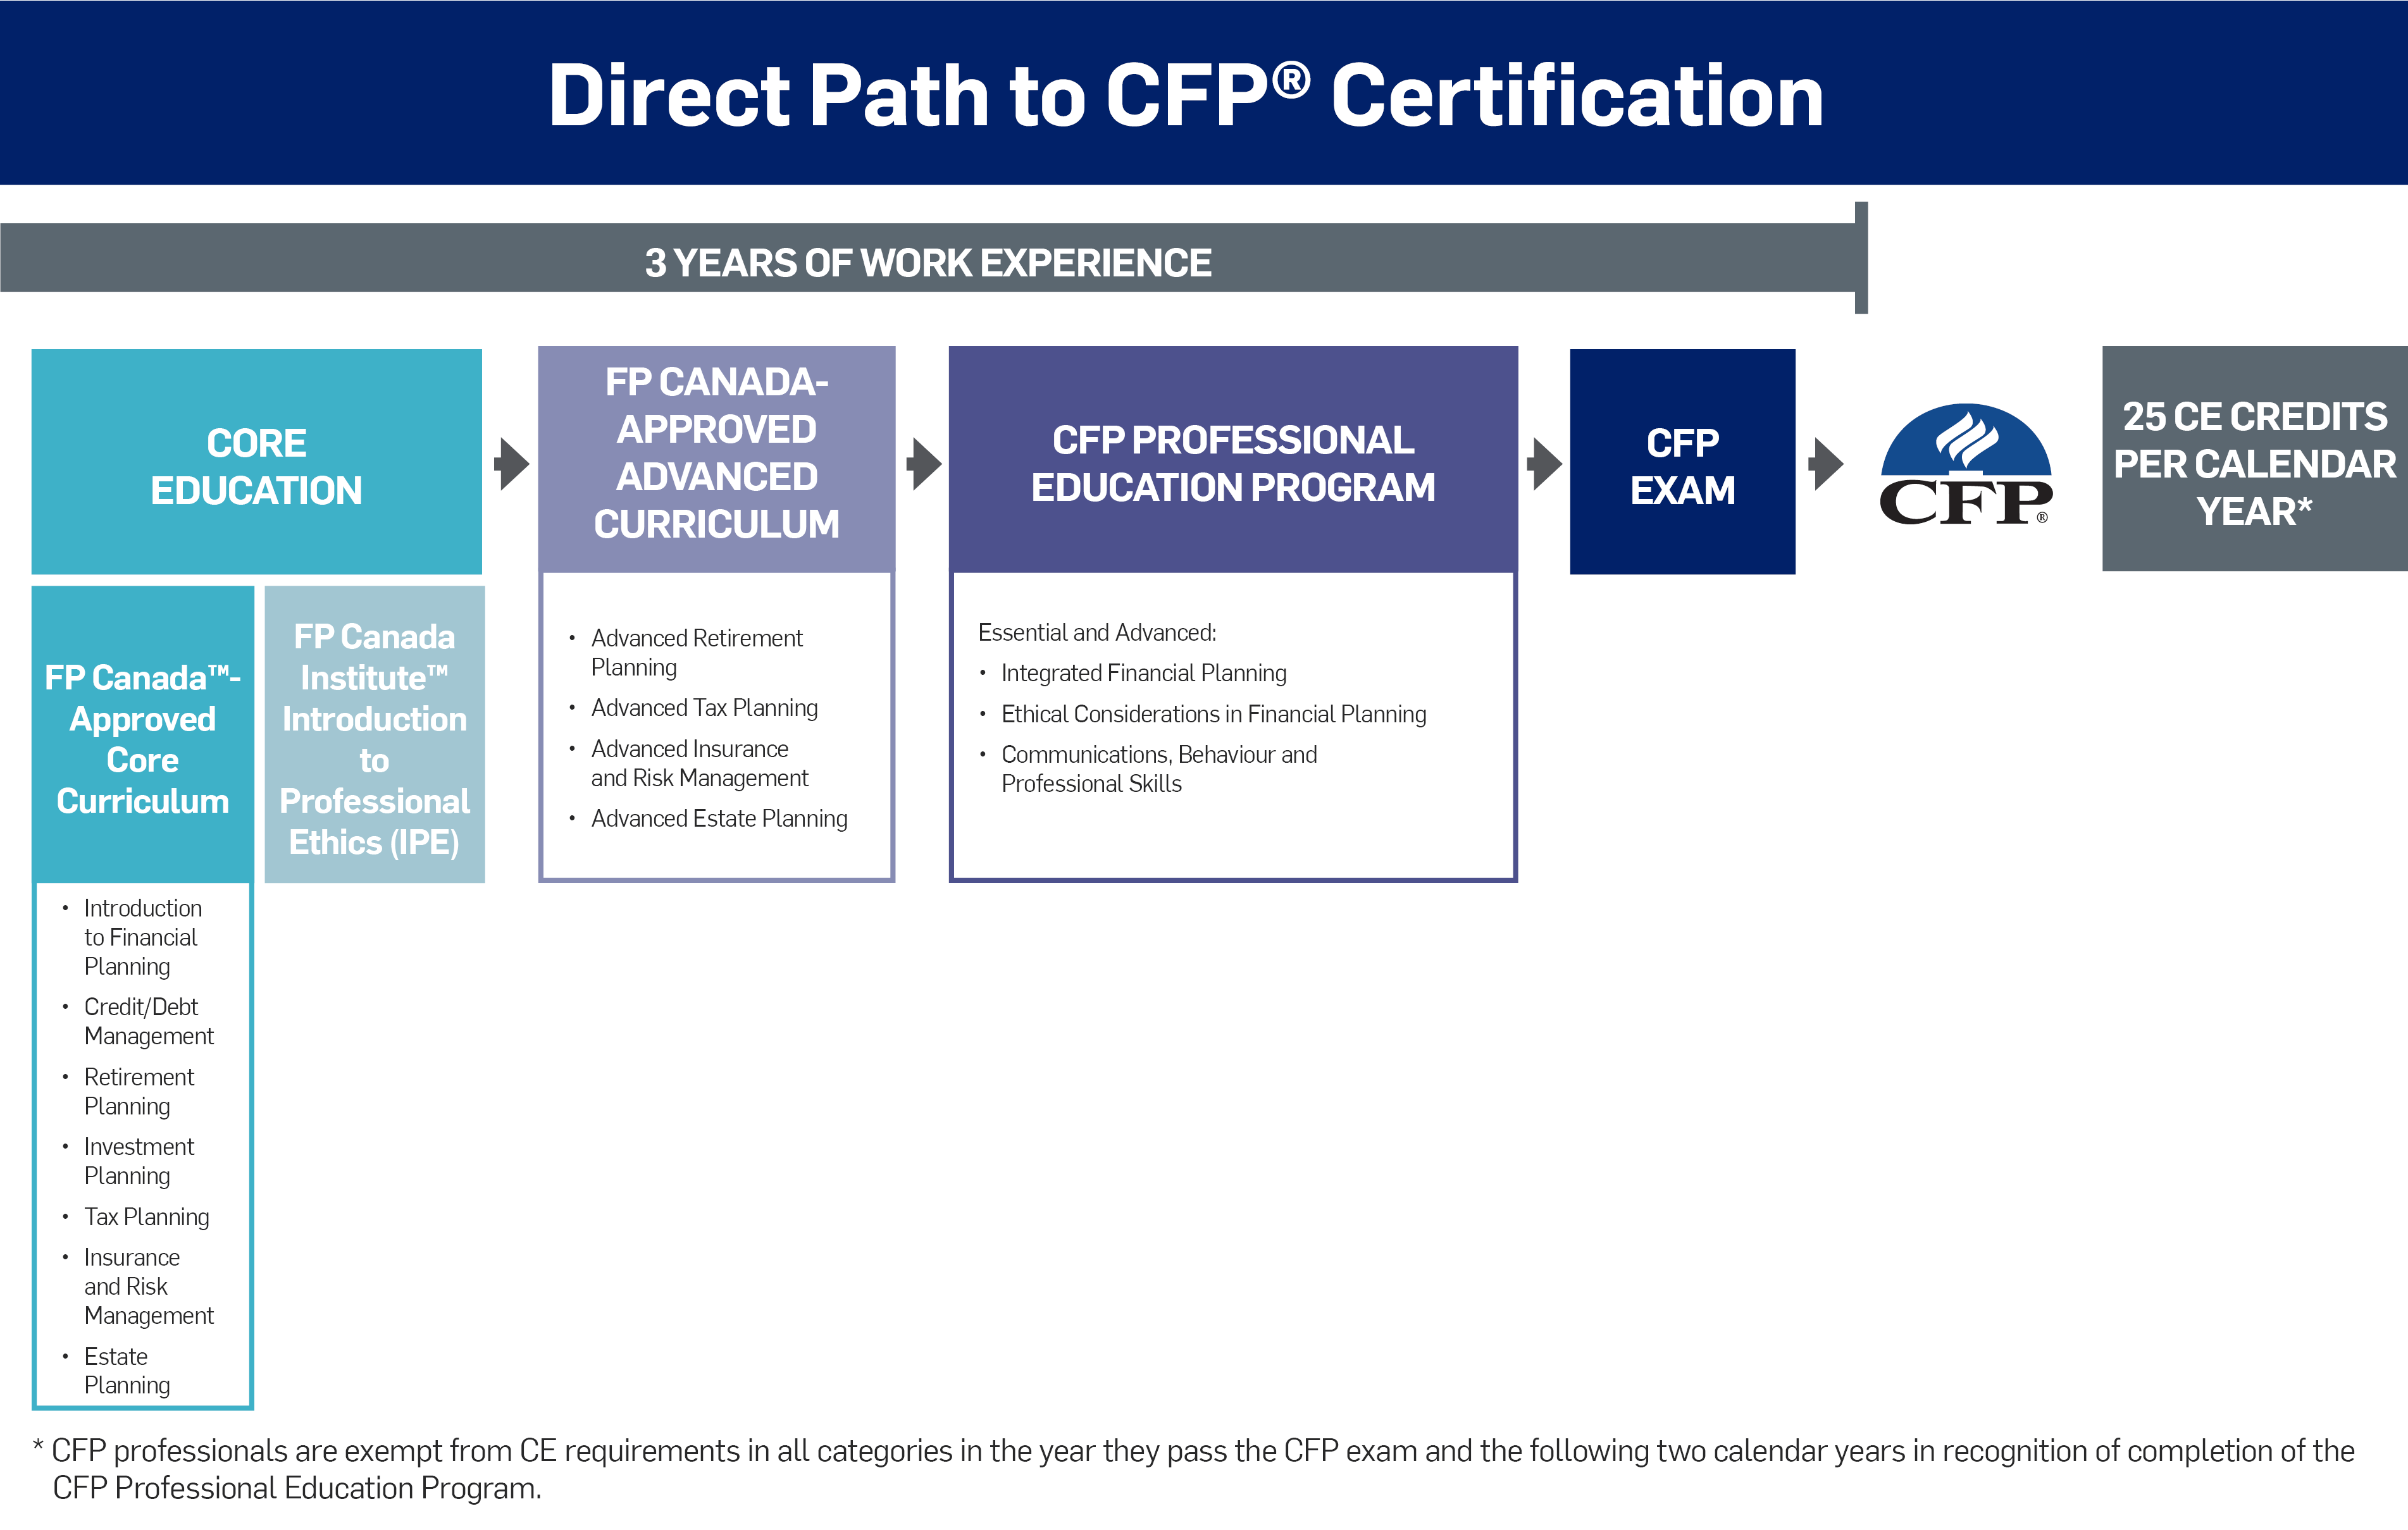 Direct Path to CFP Certification